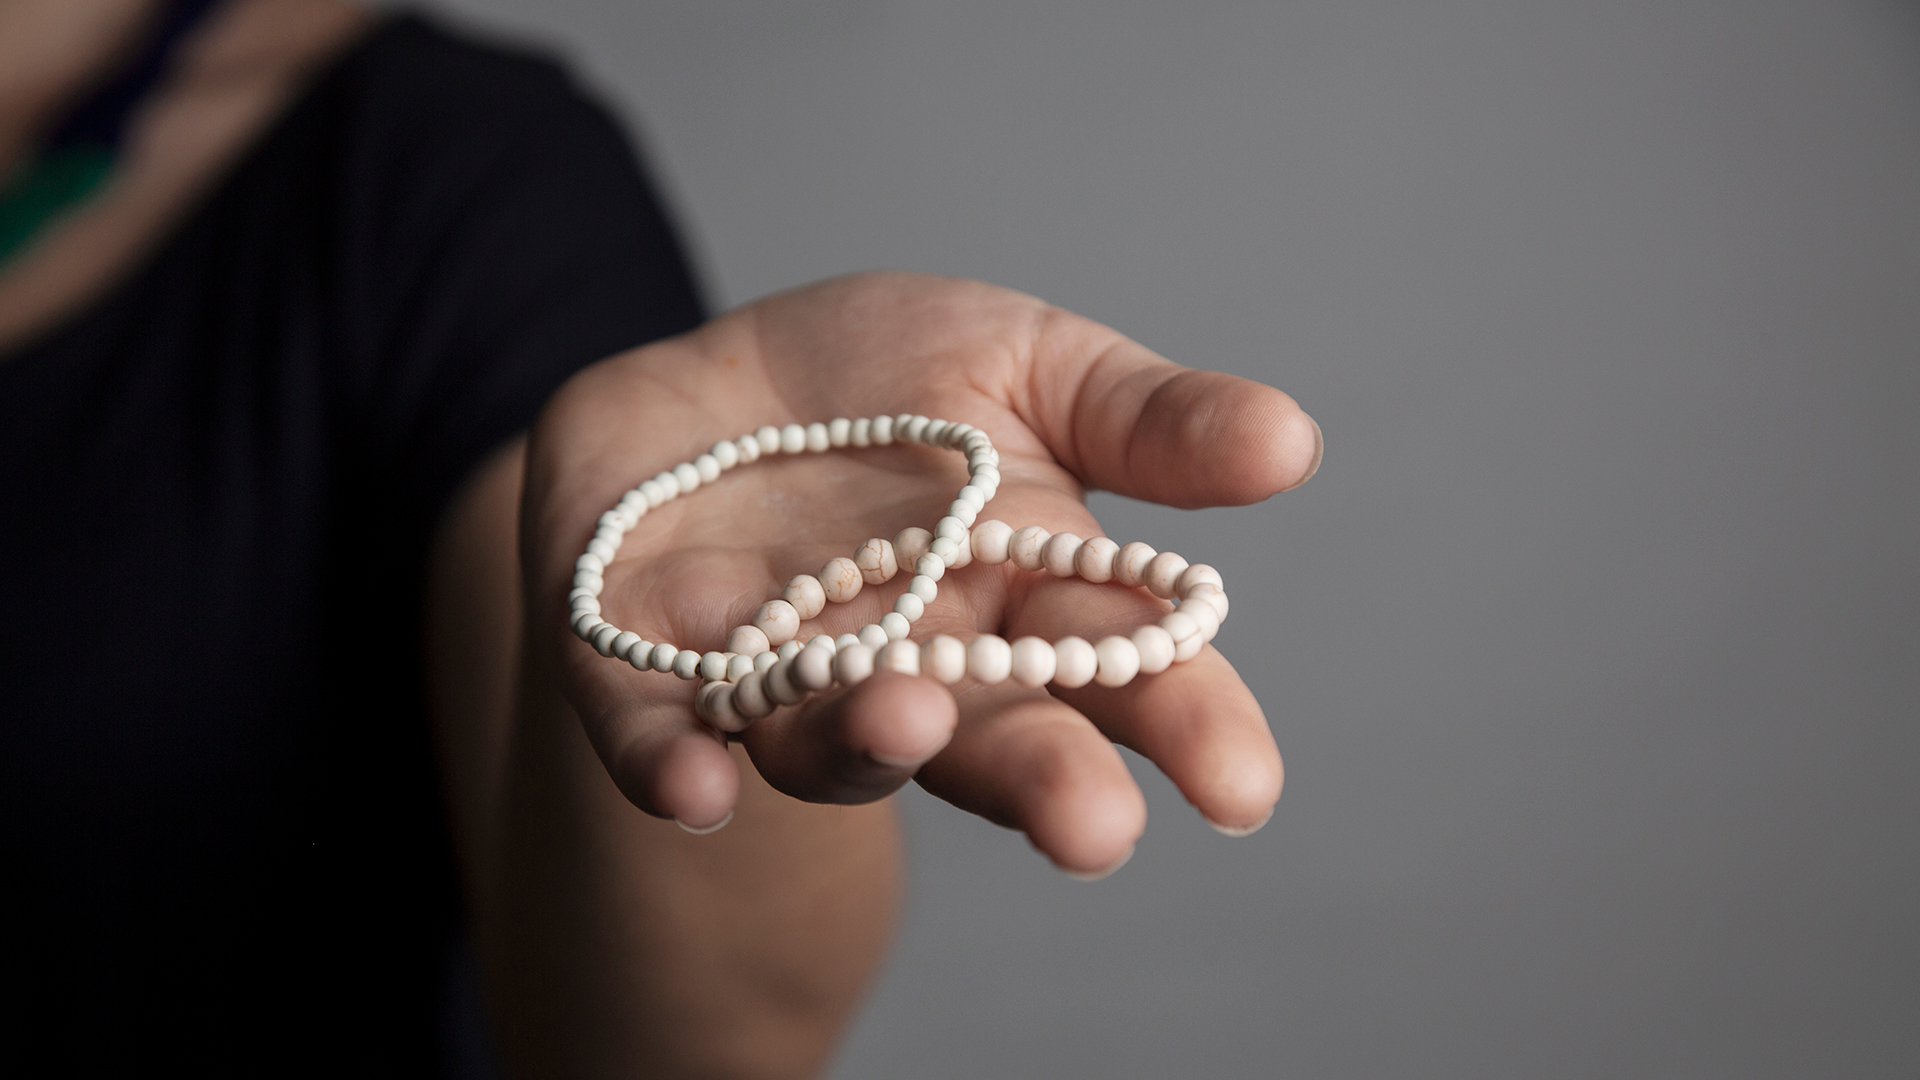 A woman offers two ivory bracelets as a gift.